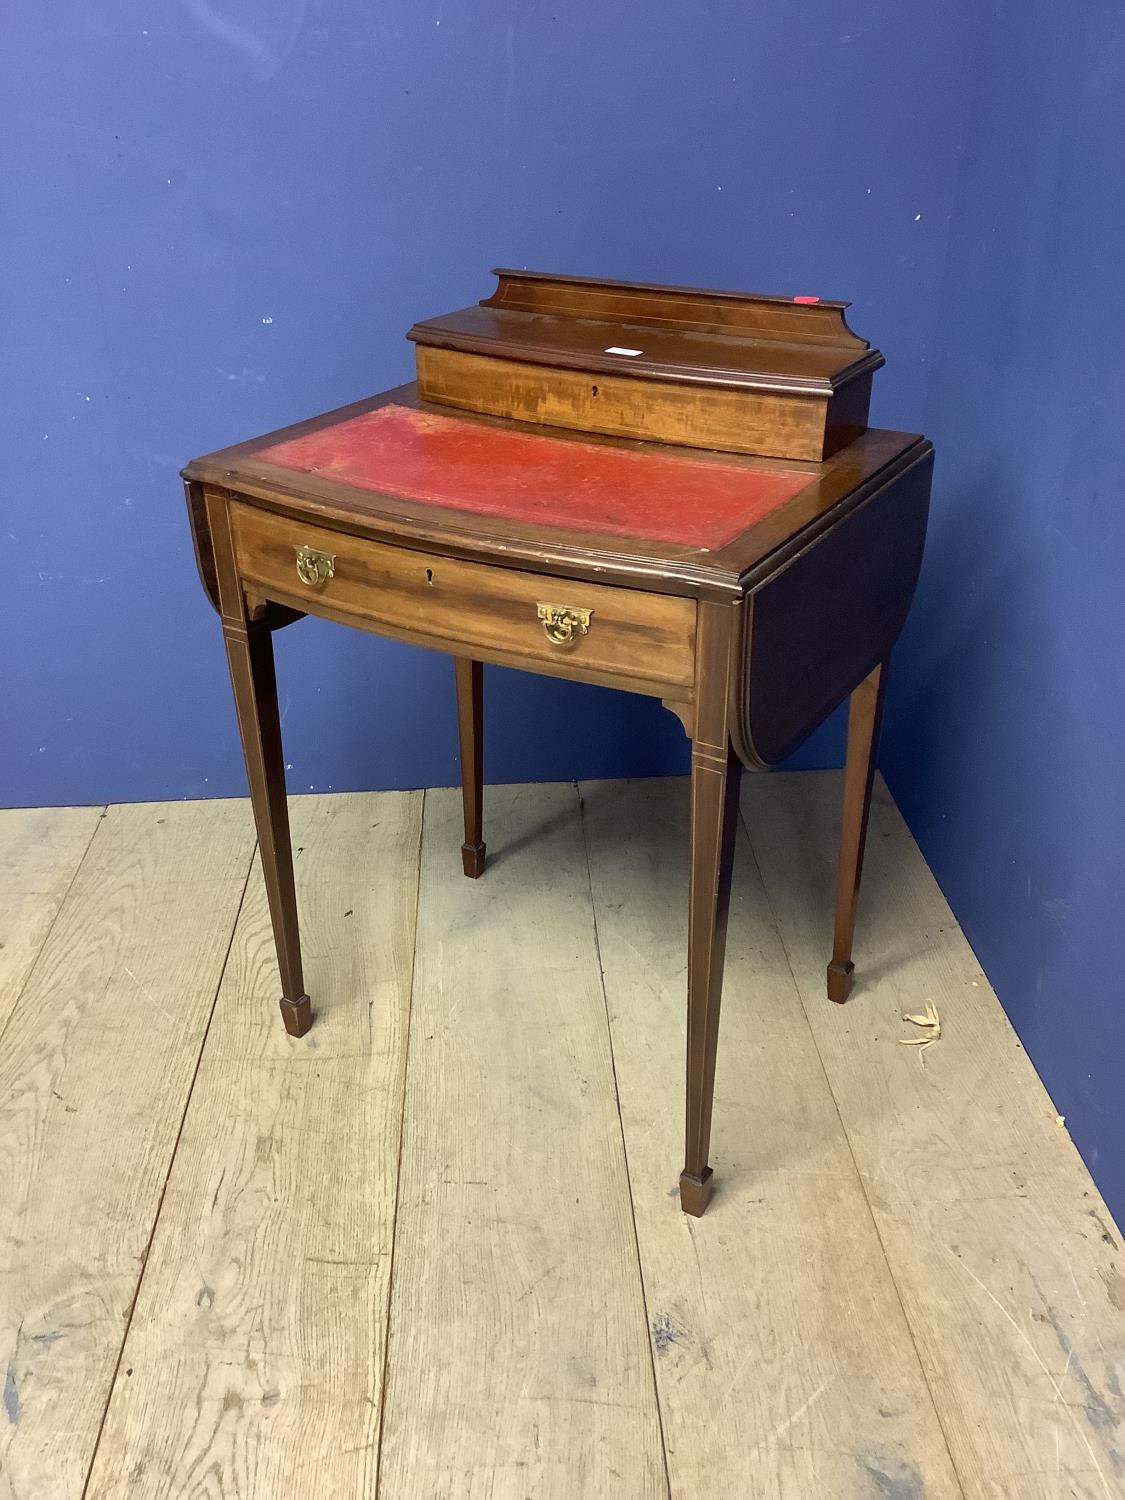 Ladies inlaid mahogany small writing table with red leather top & side flaps, 60cm W (closed). - Image 2 of 2